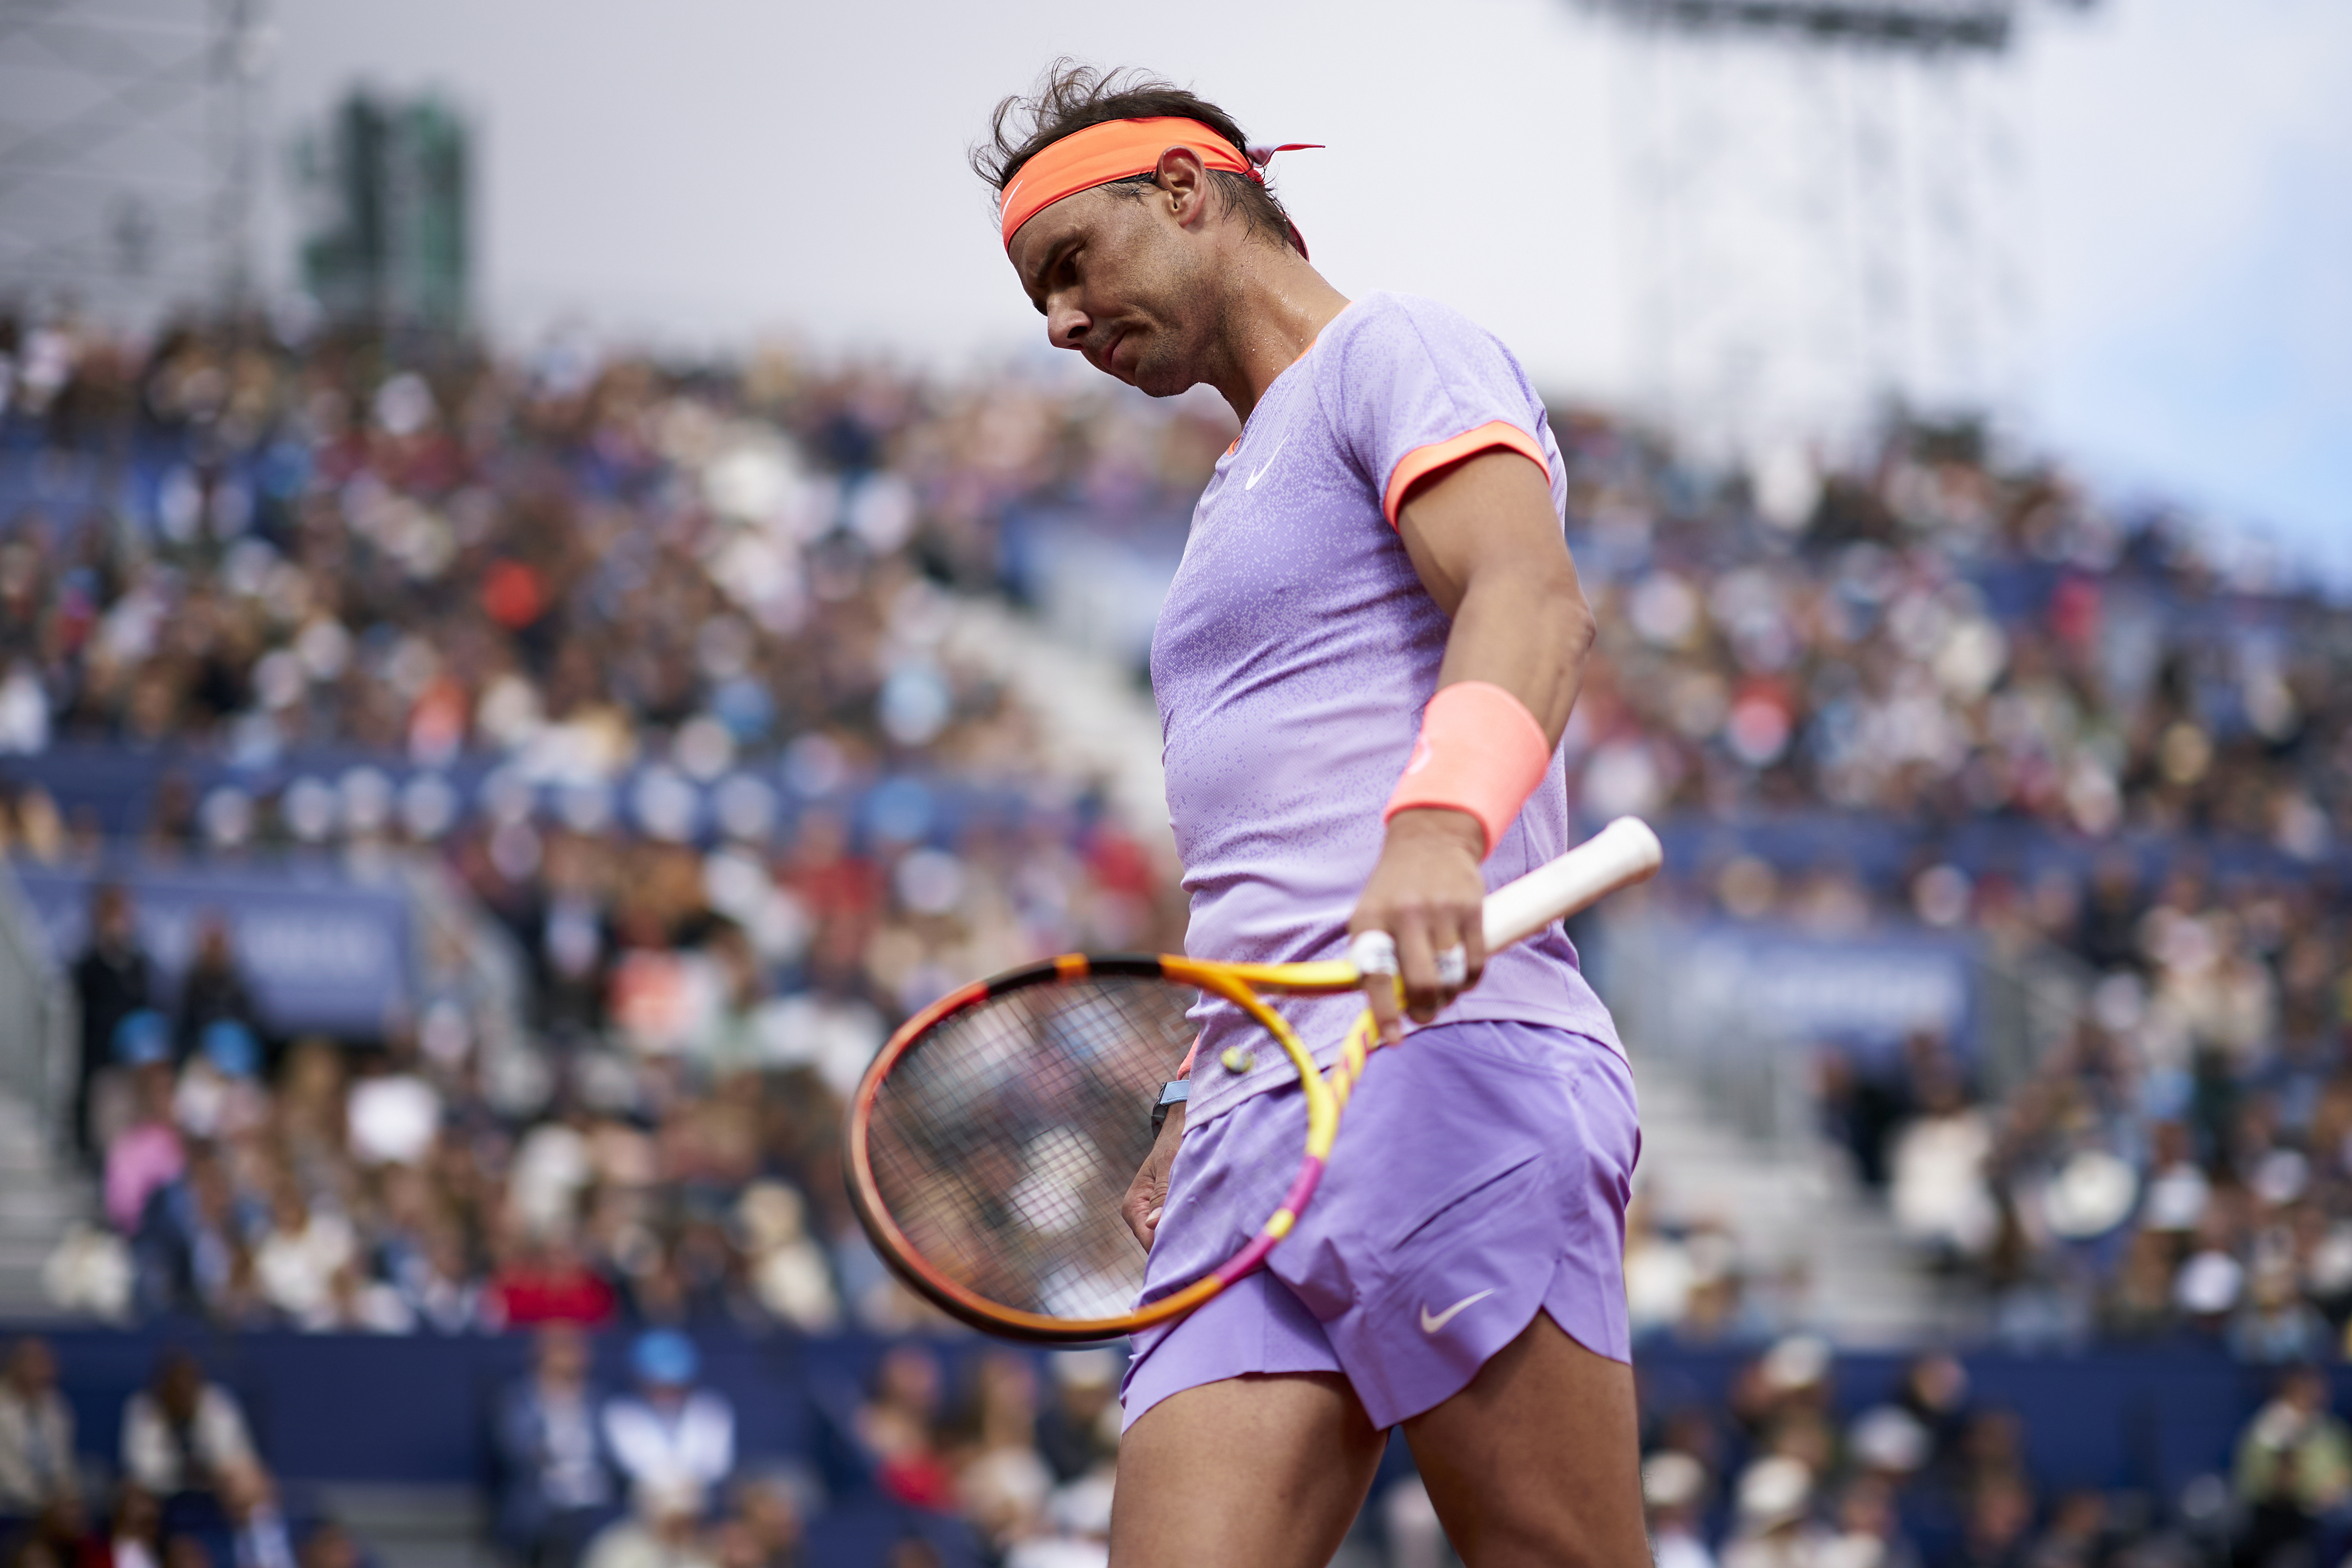 'It's never easy': Demon upstages Nadal in big win